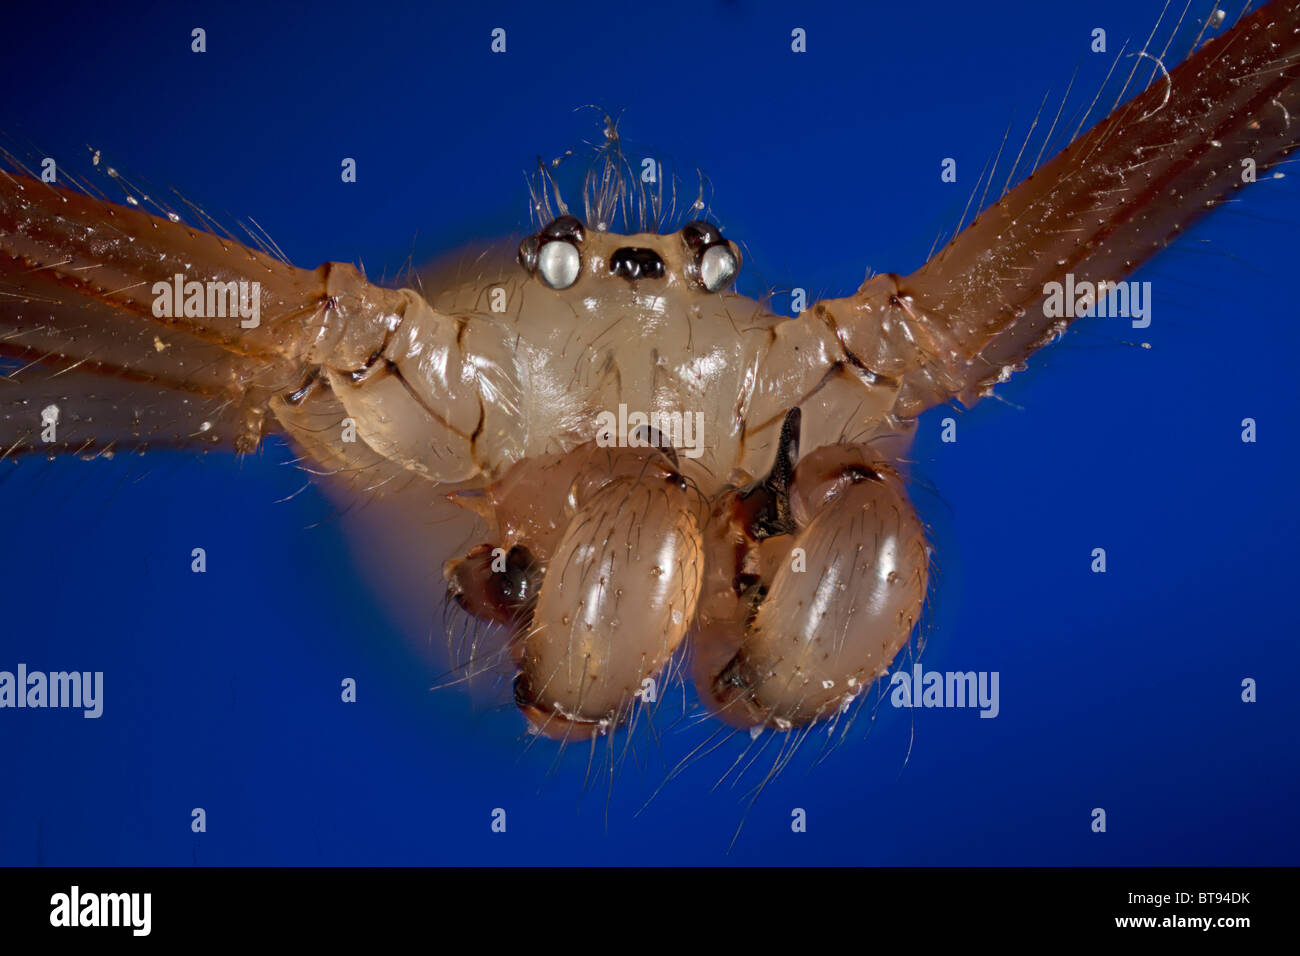 Pholcus phalangioides spider, highly magnified portrait showing palps, mandibles Stock Photo